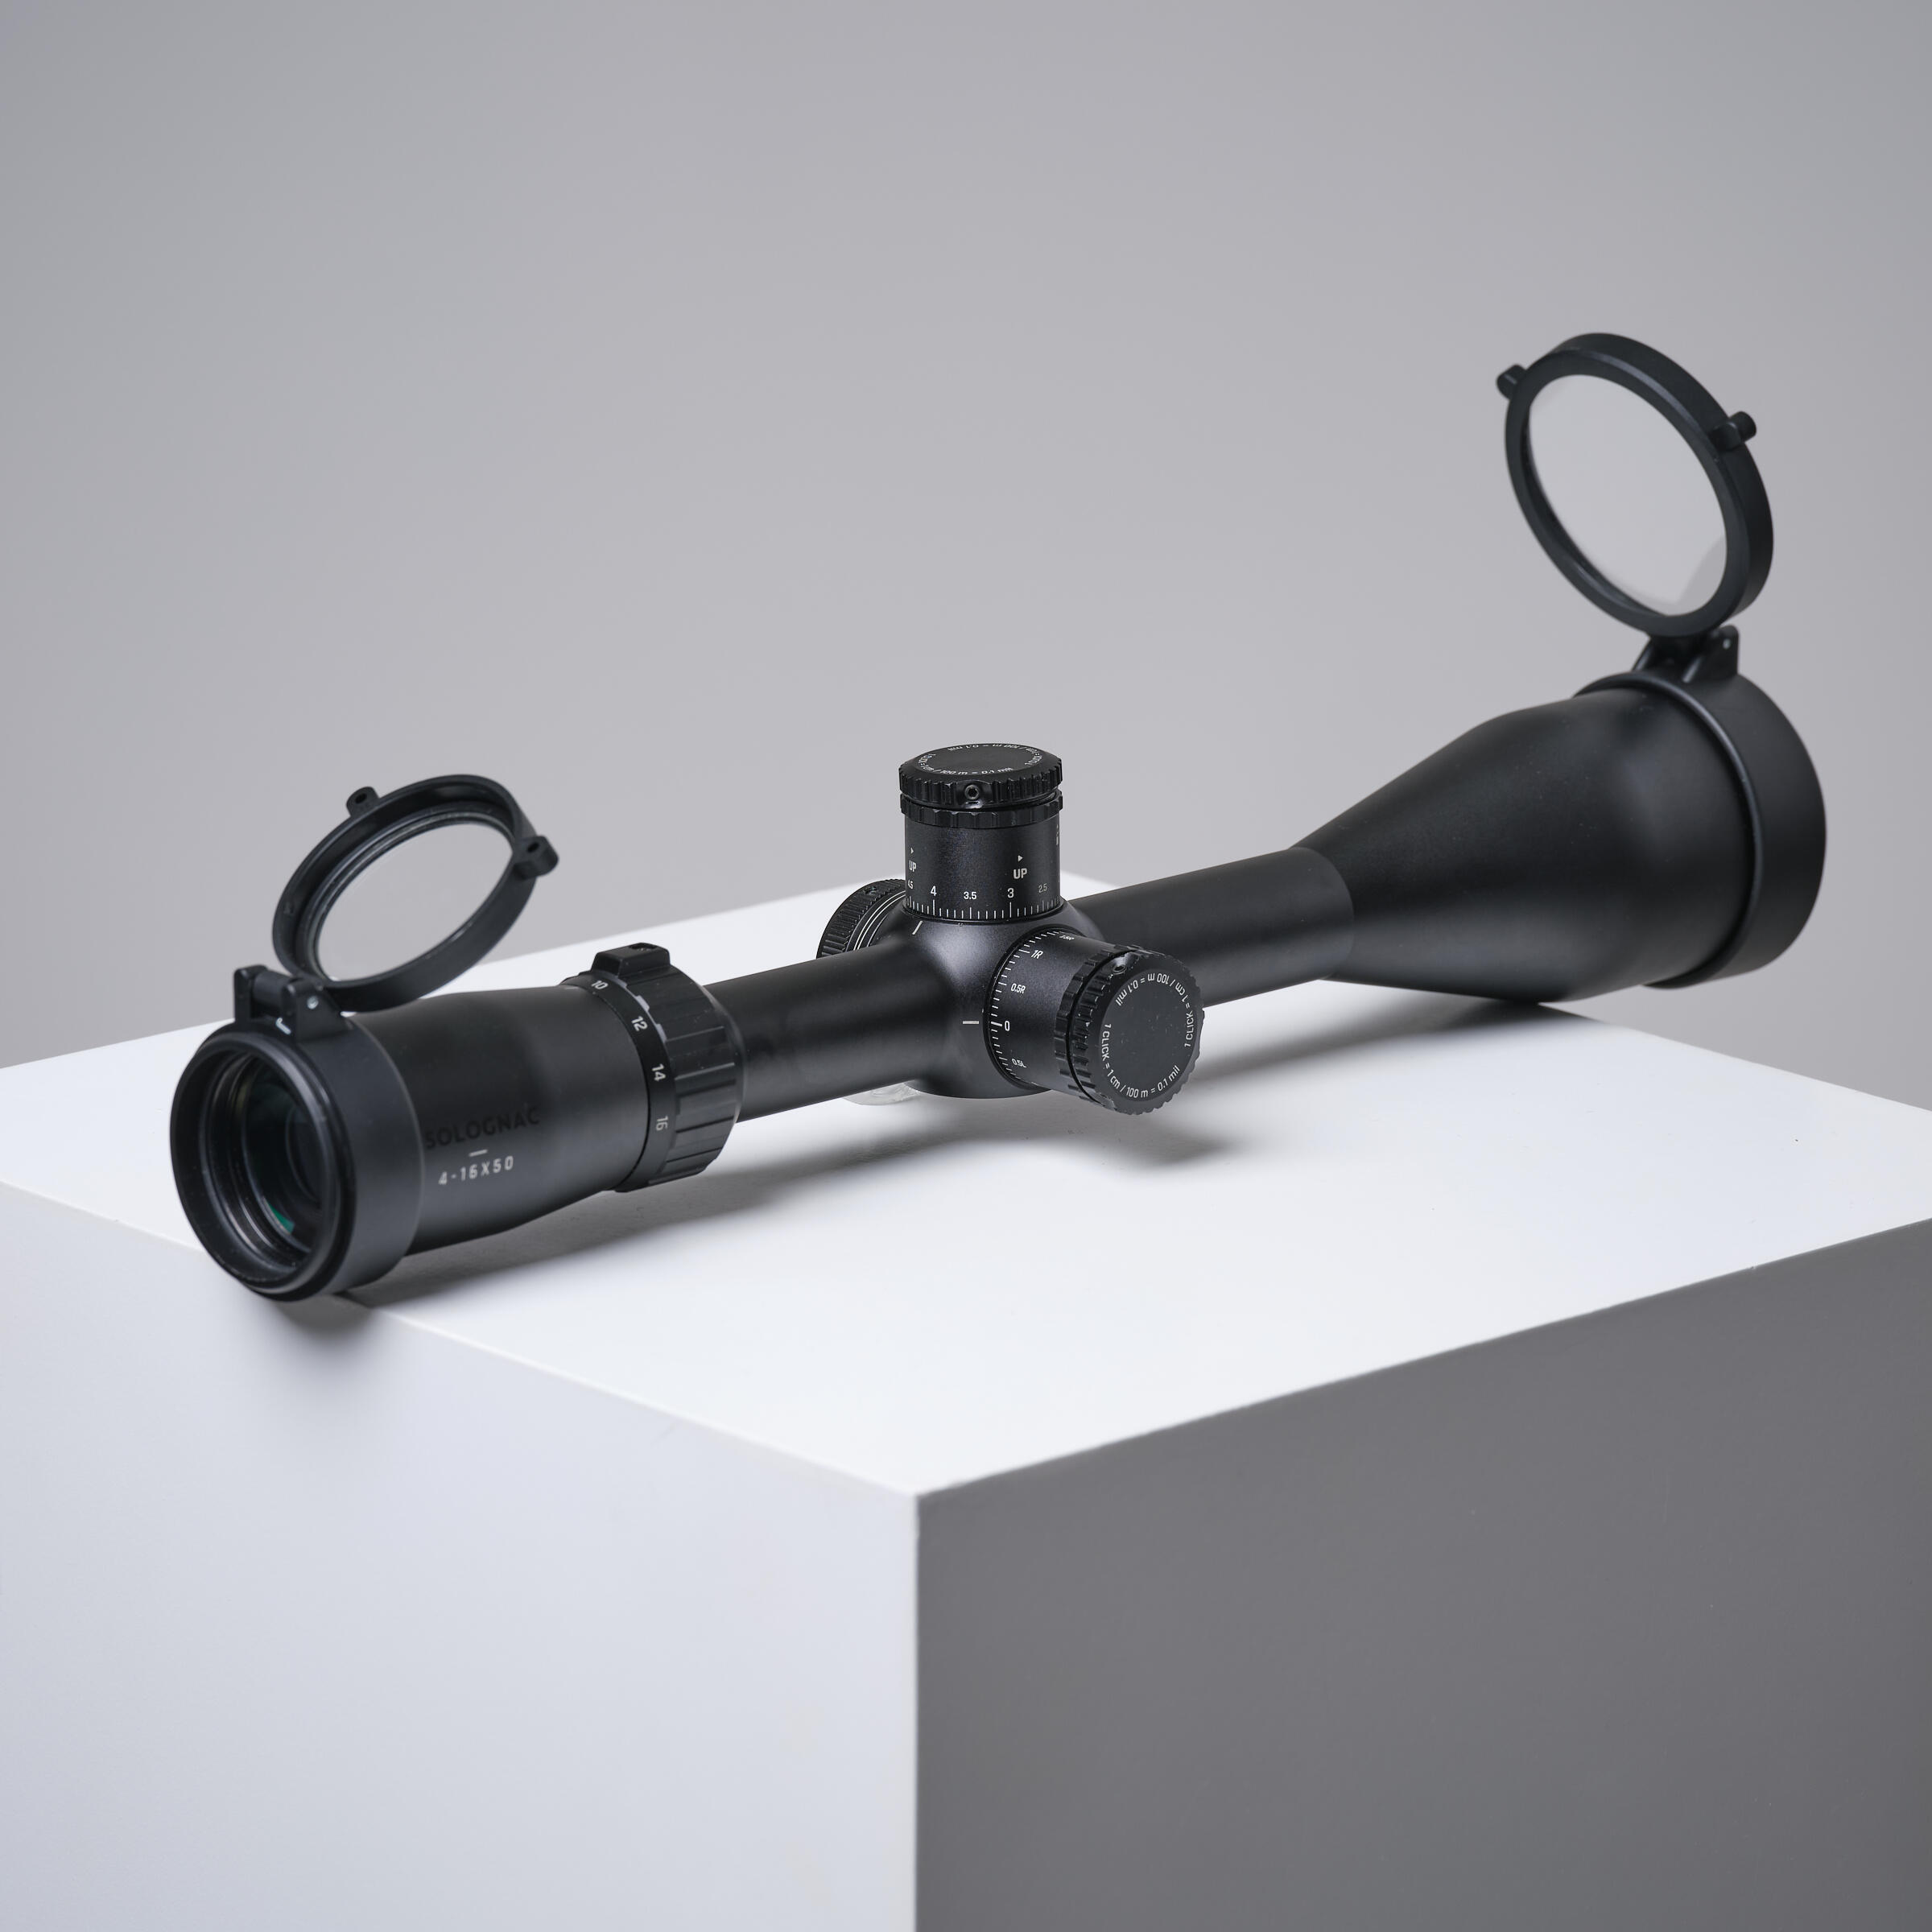 SCOPE 4-16X50 with adjustable parallax 4/11